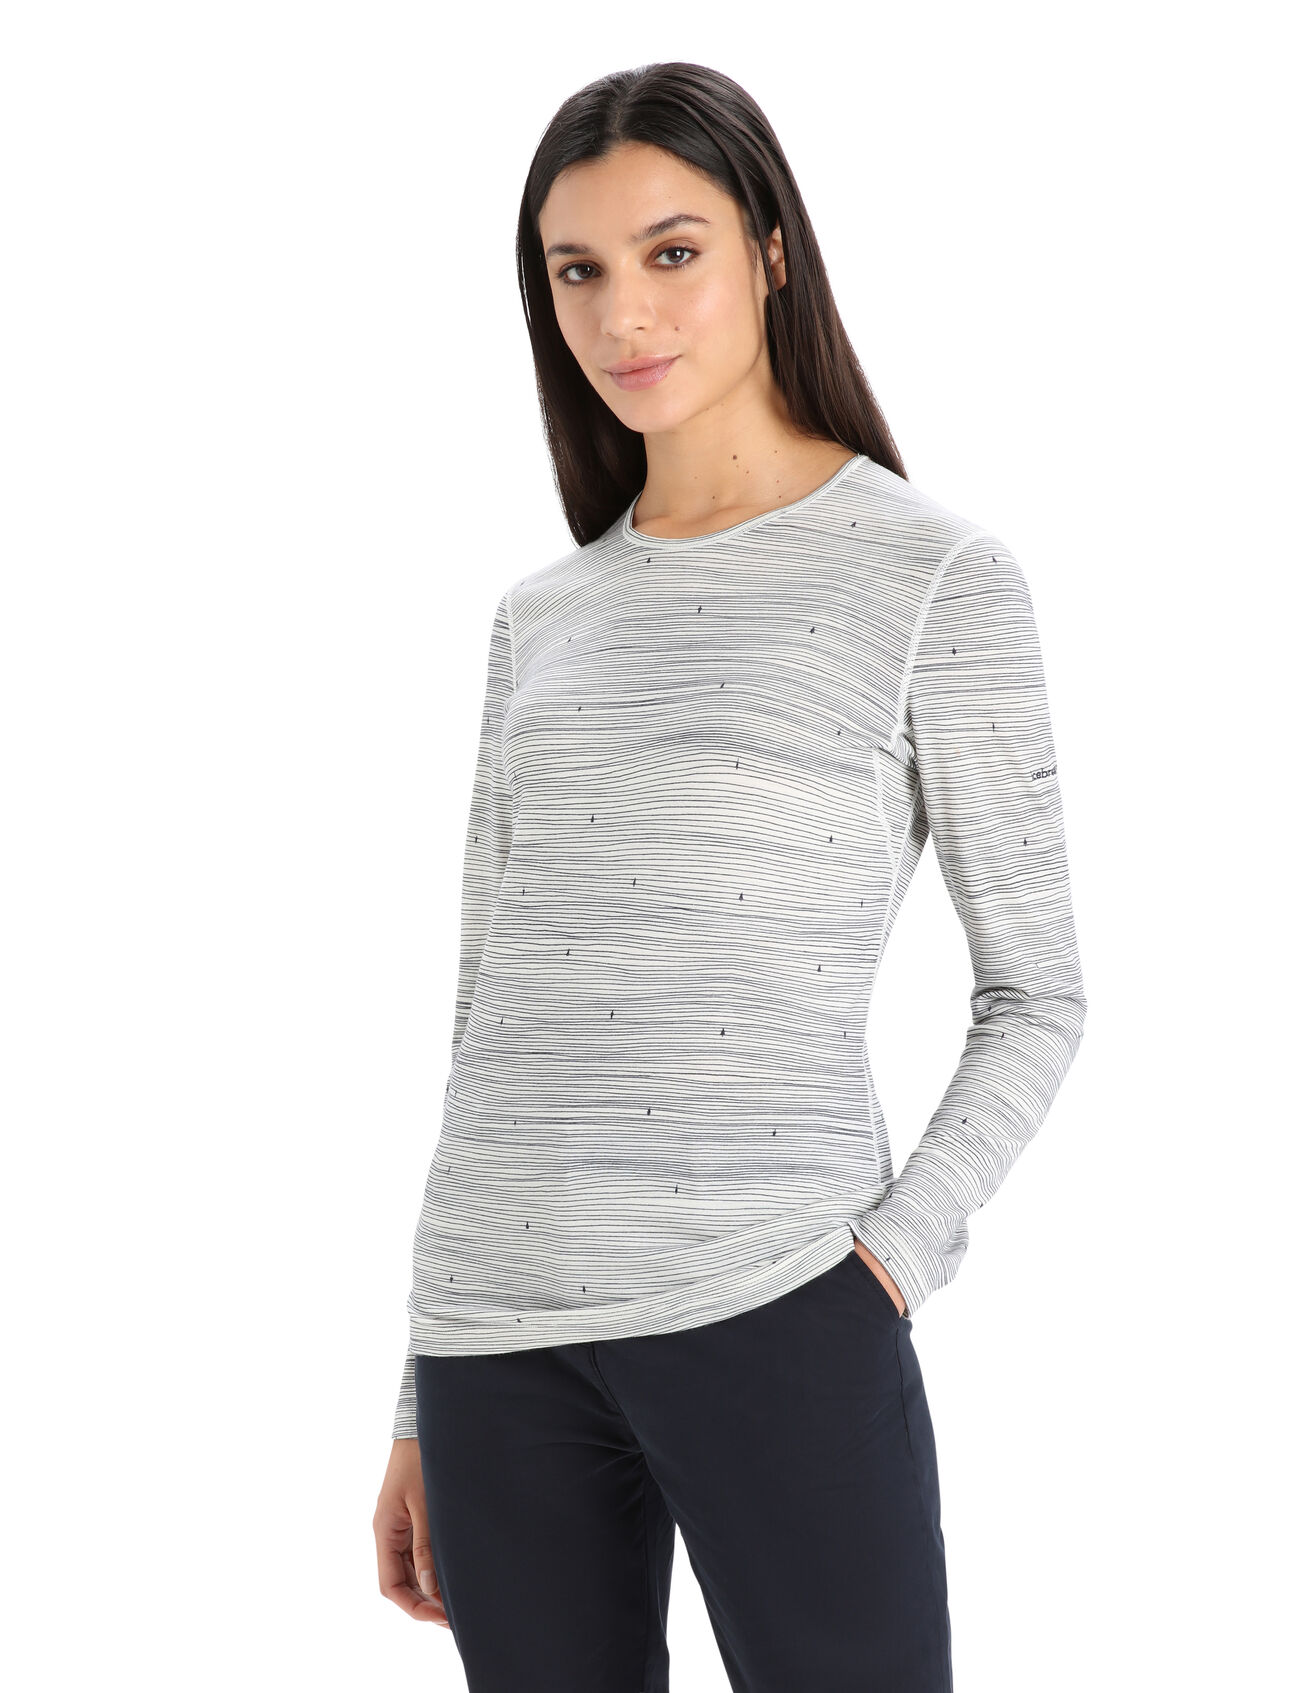 Womens Merino 200 Oasis Long Sleeve Crewe Thermal Top Ski Tracks The benchmark against which all others are judged, the 200 Oasis Long Sleeve Crewe Ski Stripes features our most versatile merino jersey fabric for year-round layering performance across any activity. The all-over graphic print draws inspiration from the artistic imprint of ski tracks.